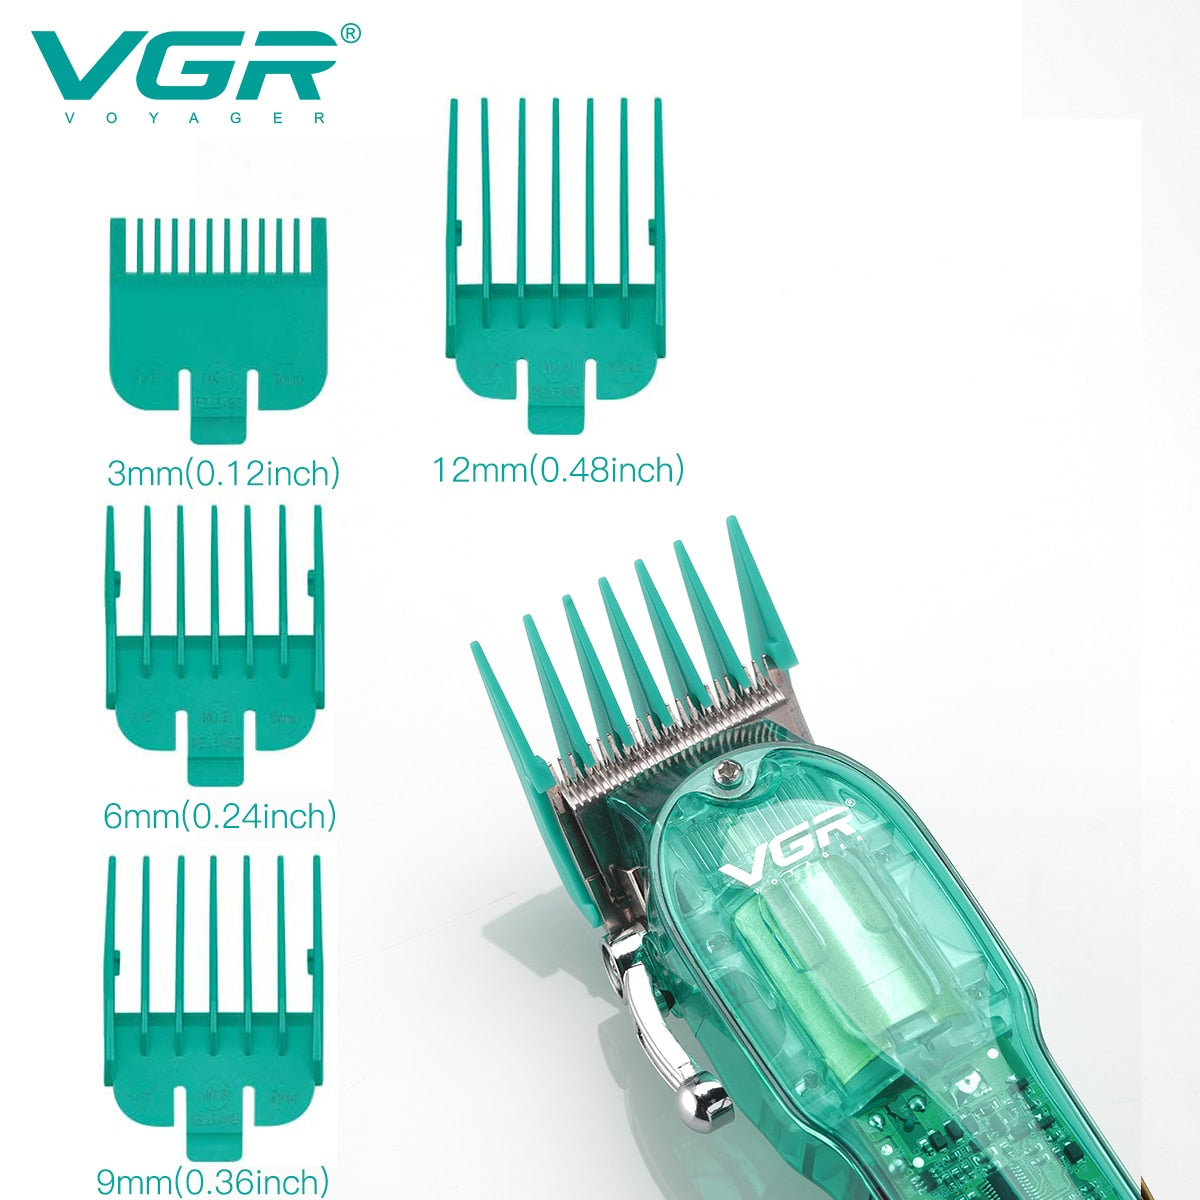 VGR V-660 Professional Hair Trimmer For Barber Clipper - HAB - Hair And Beauty